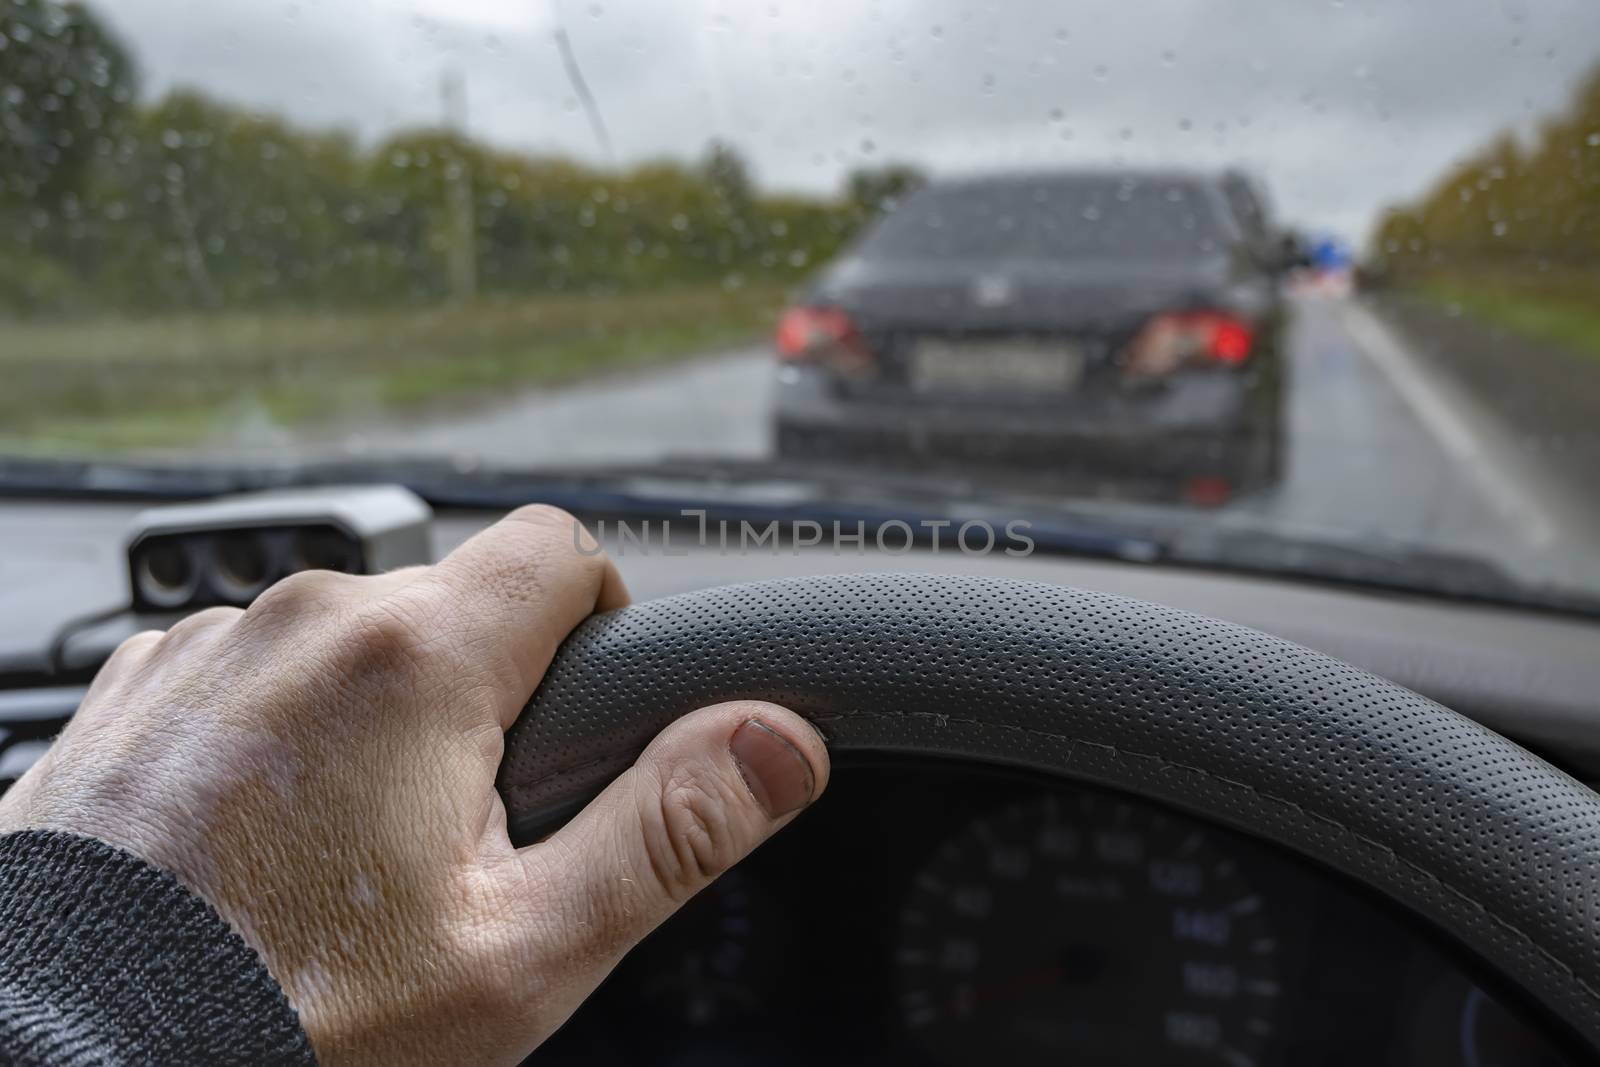 the driver hand on the steering wheel of a car in a traffic jam due to road repairs by jk3030